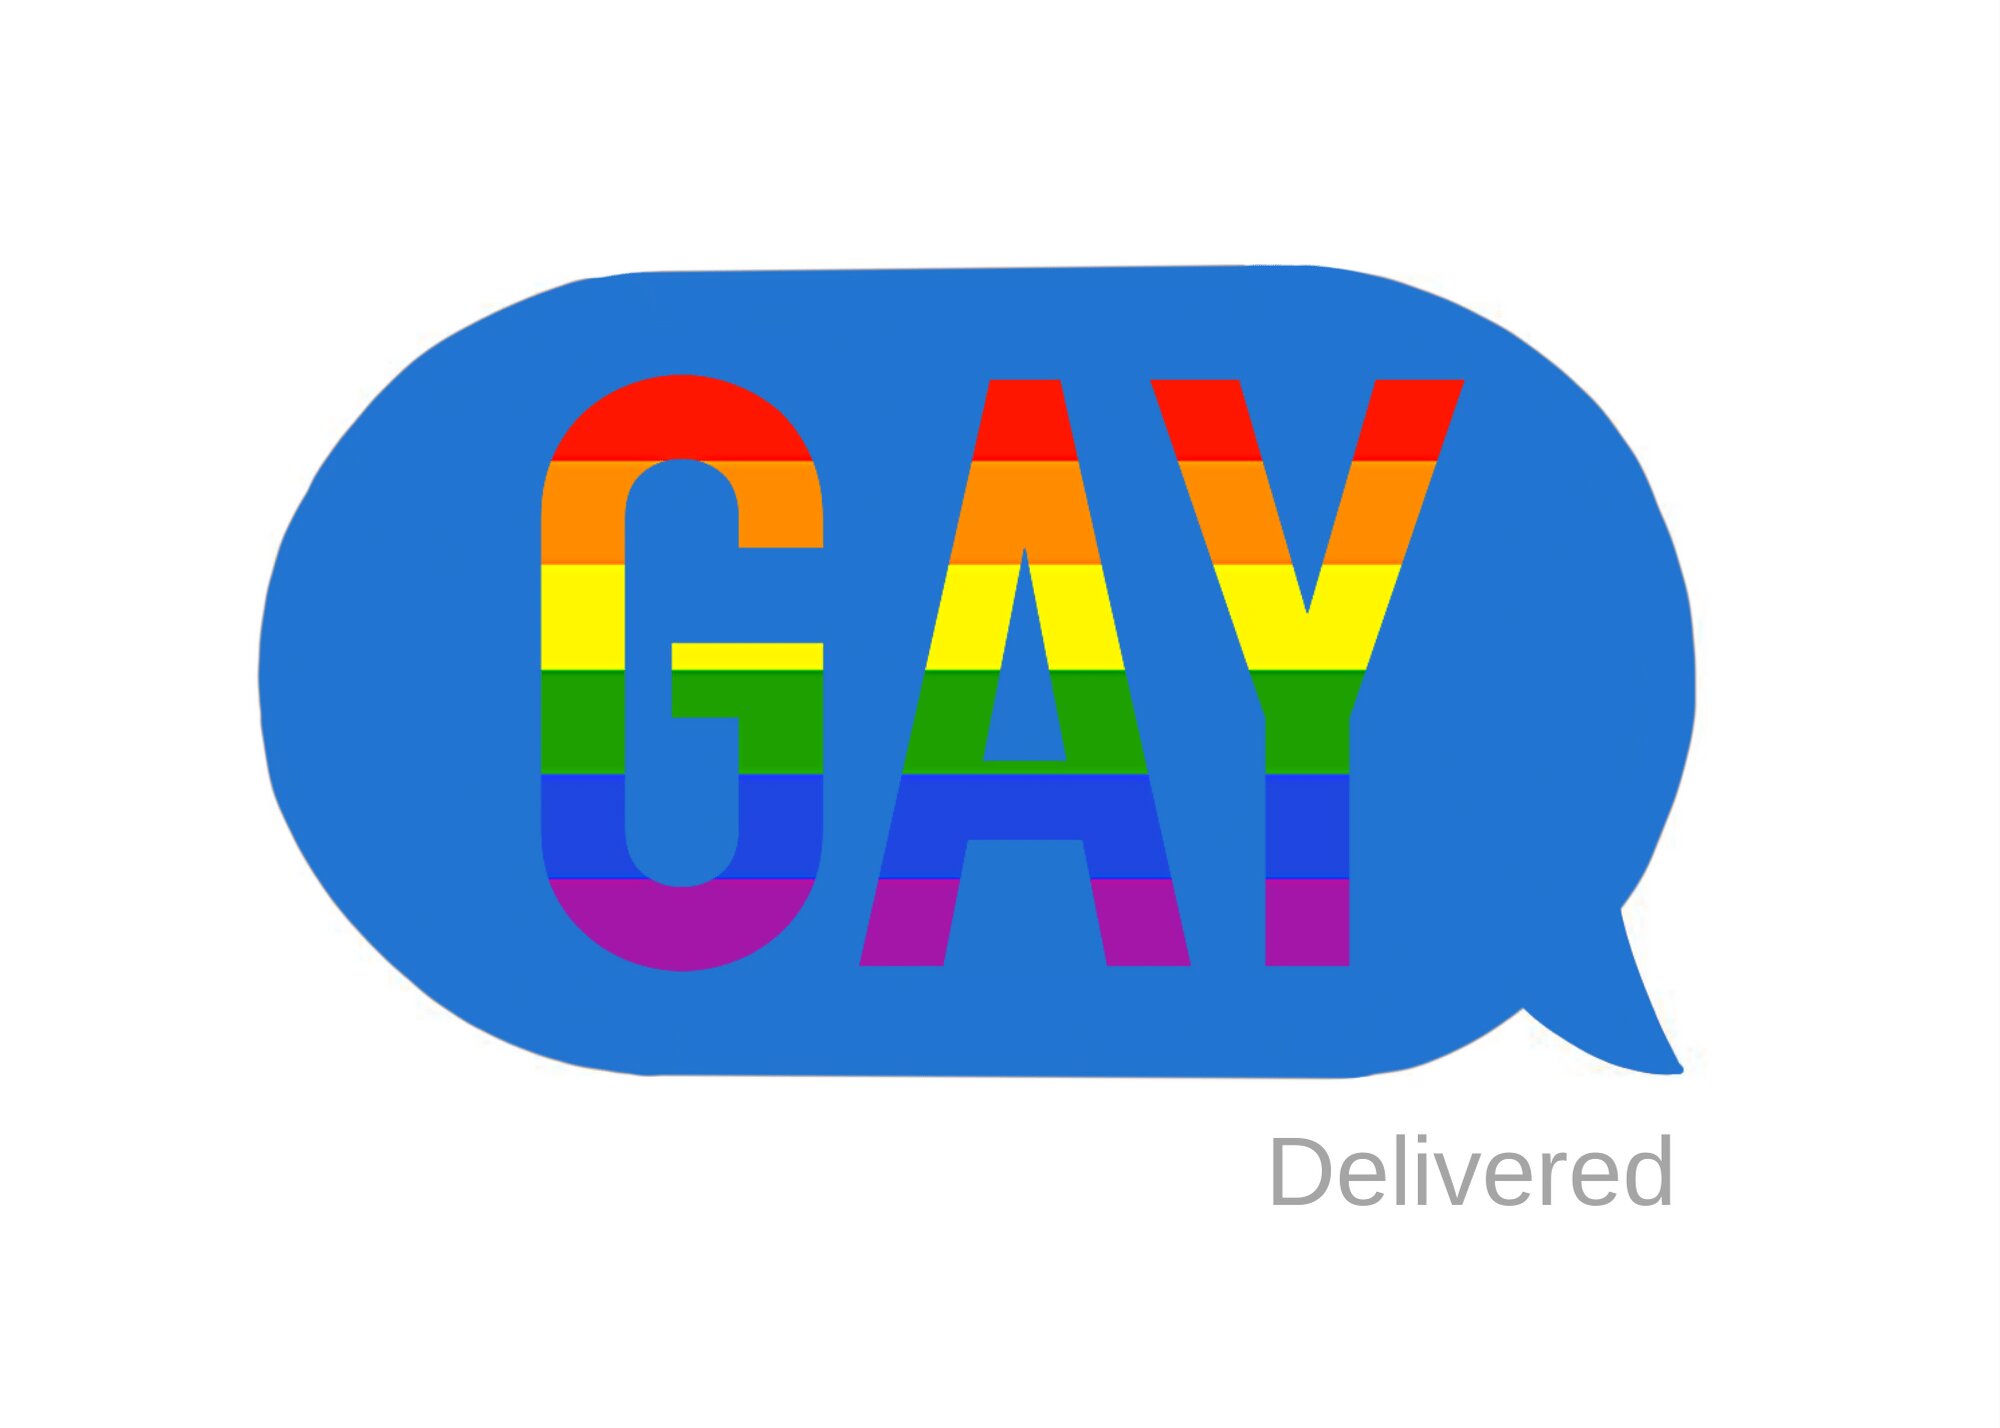 The updated definition of the word gay is tied to the LGBTQ+ community.